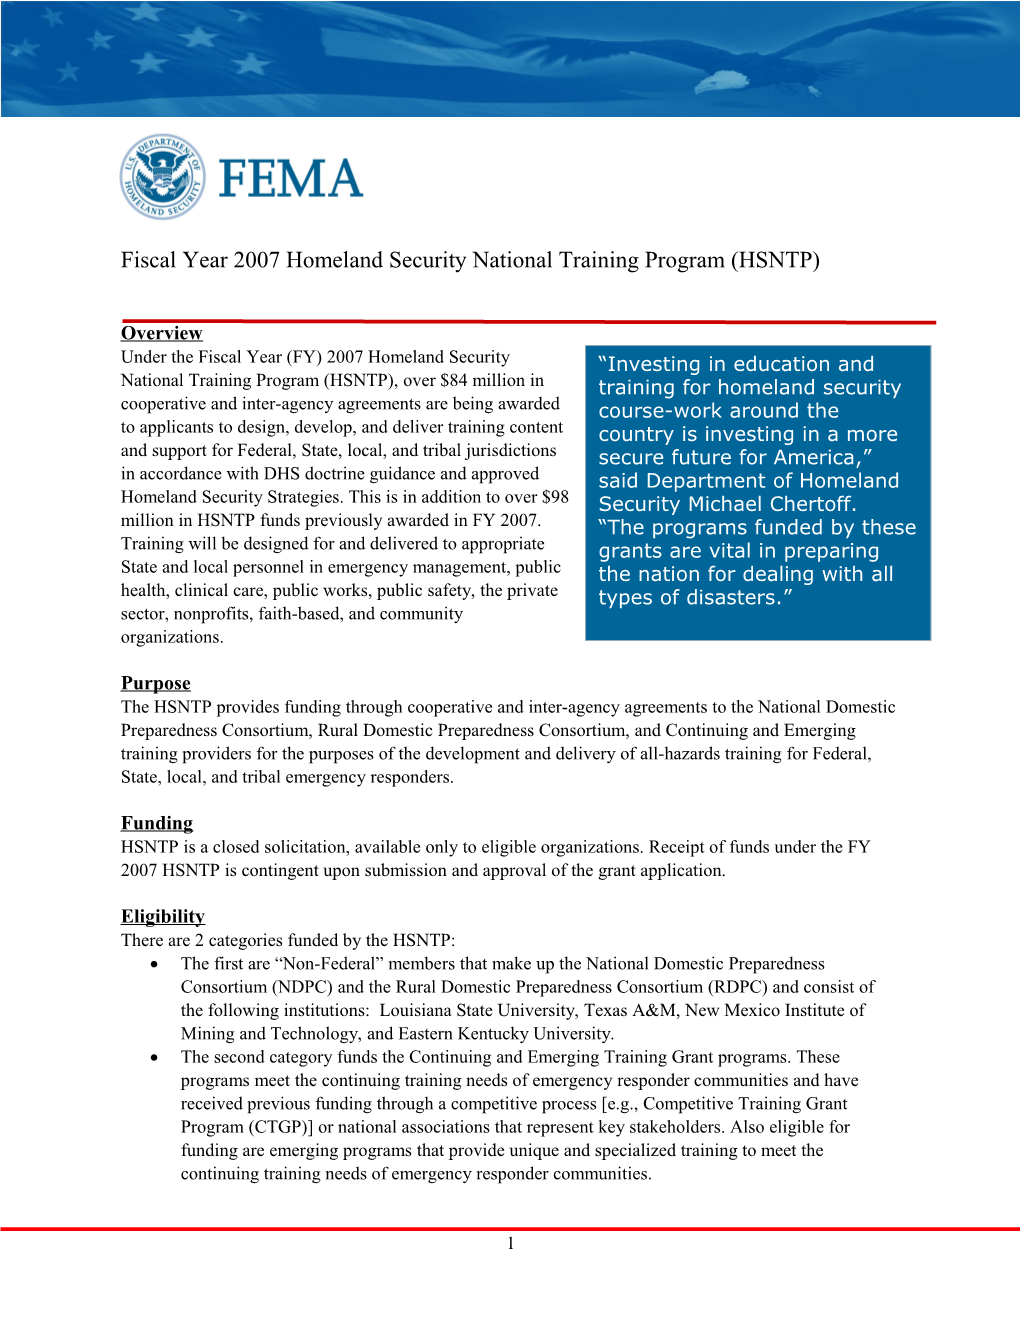 Fiscal Year 2007 Homeland Security National Training Program (HSNTP)